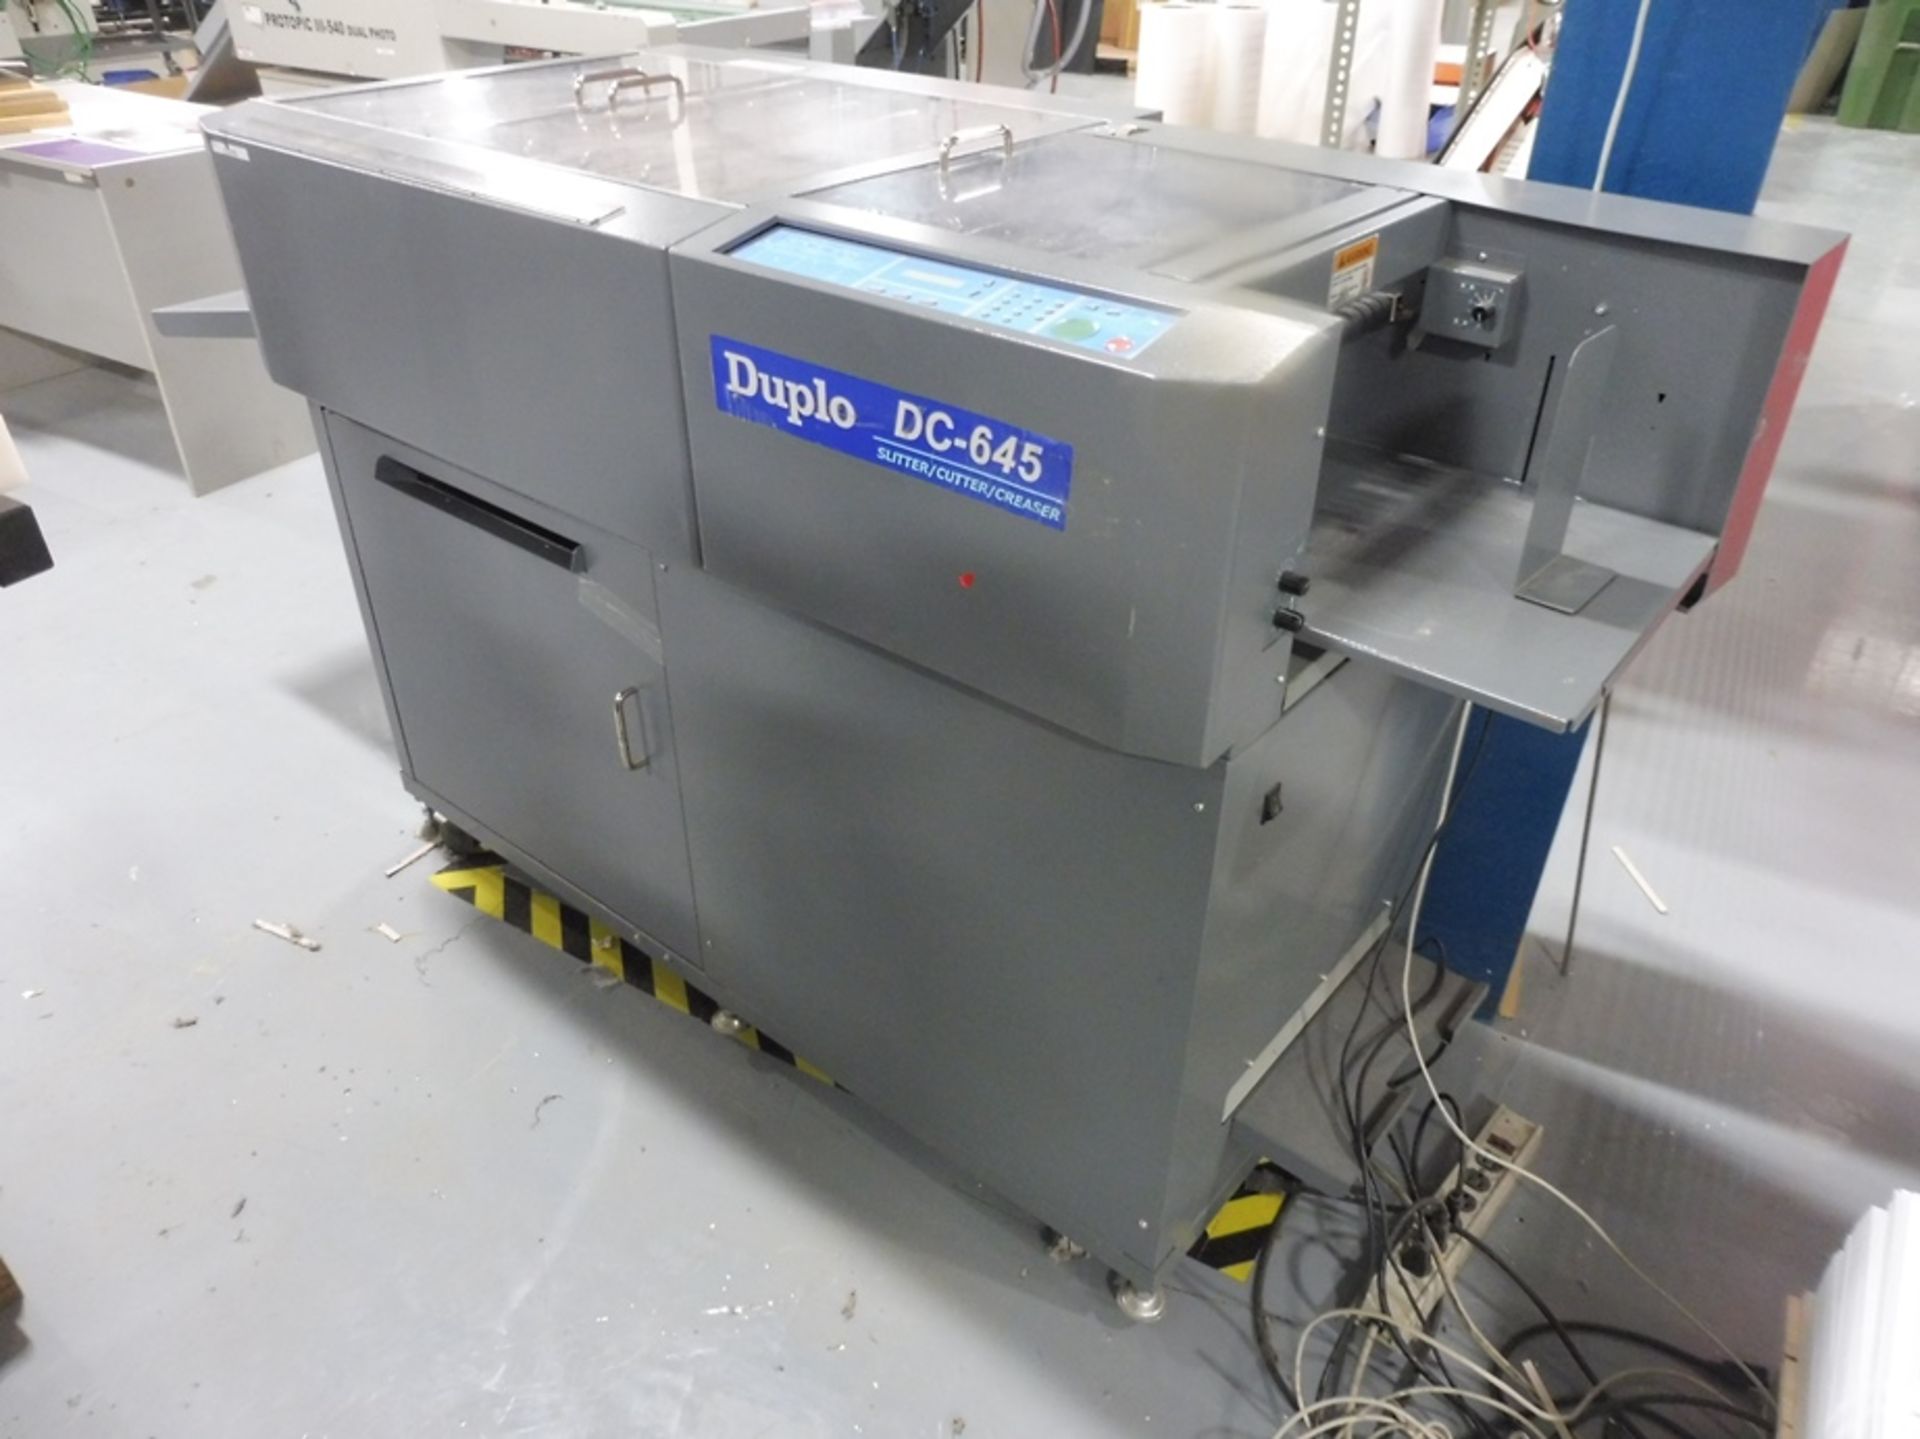 2005 DUPLO "DC-645" Heavy Duty Slitter/Cutter/Creaser, S/N: 070553590, Up To 26 Sheets/Minute. (